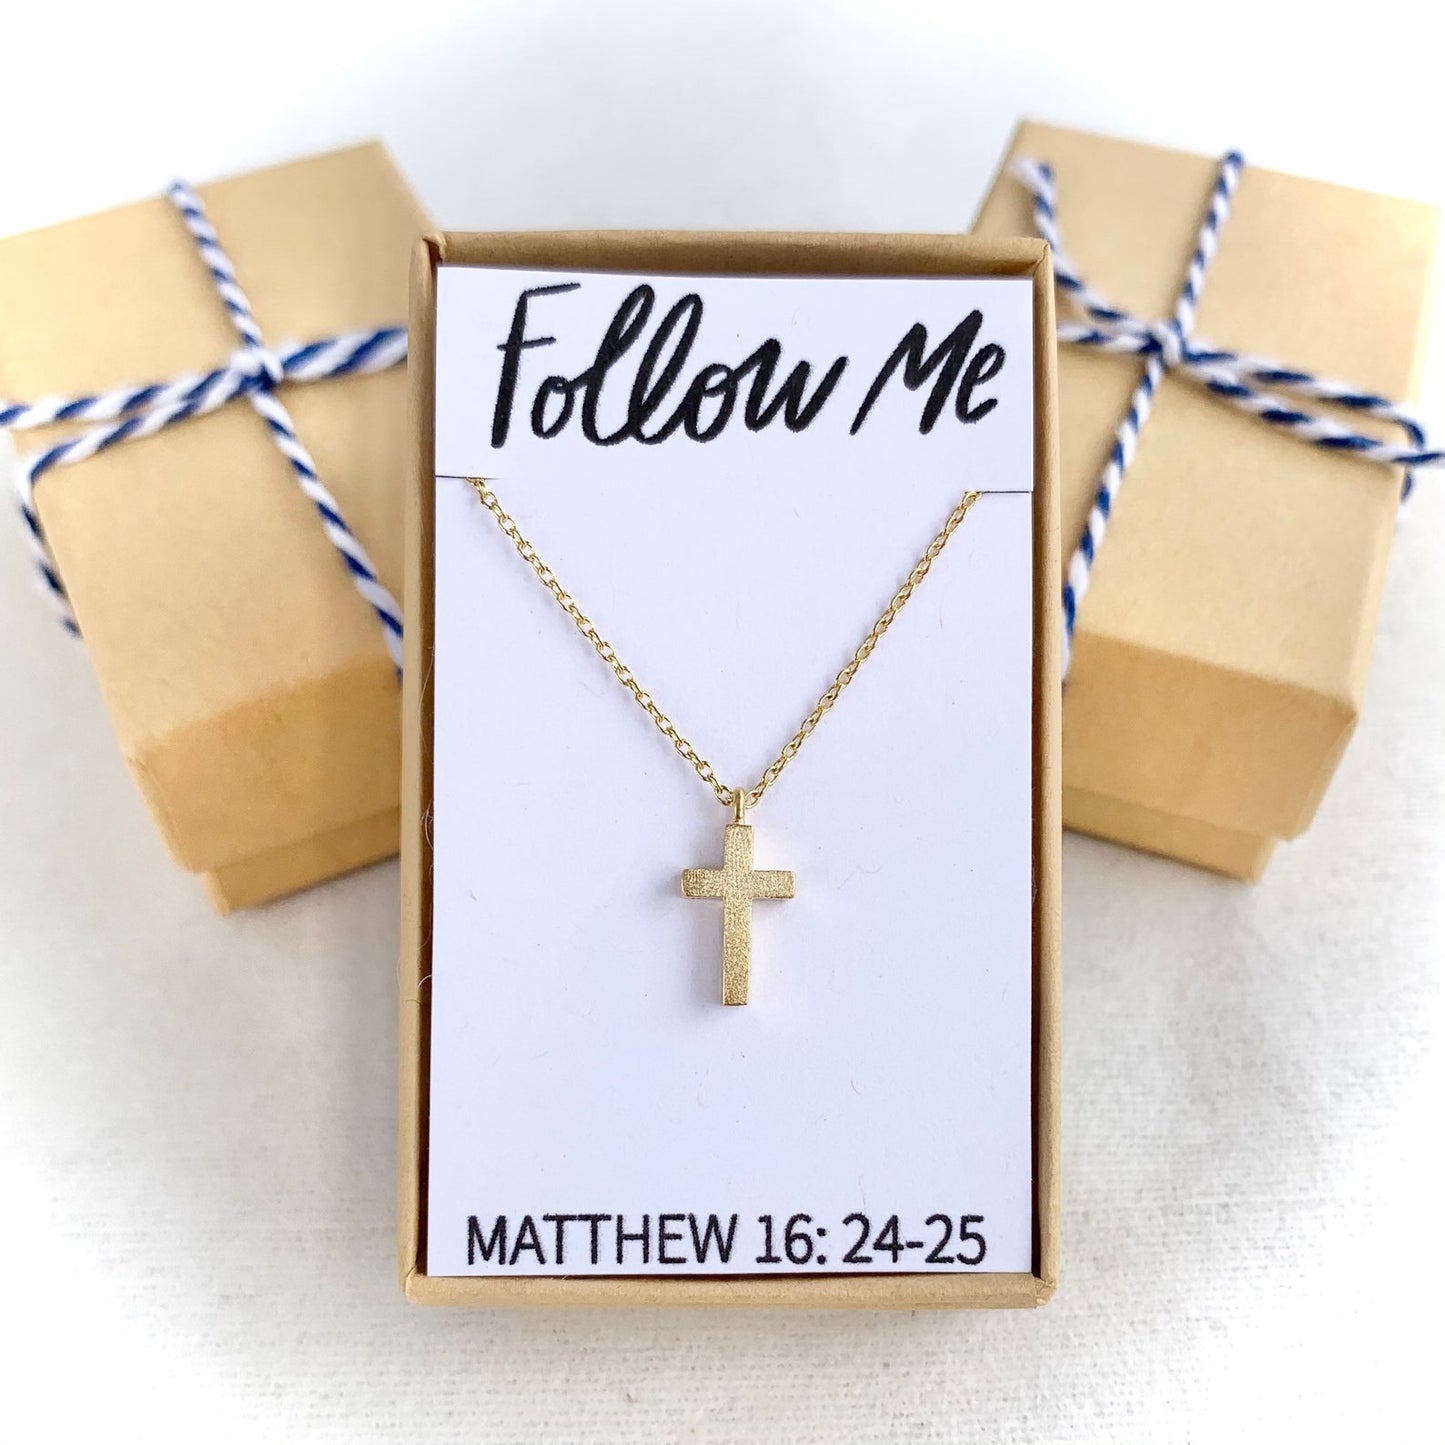 Follow Me Necklace Small Cross